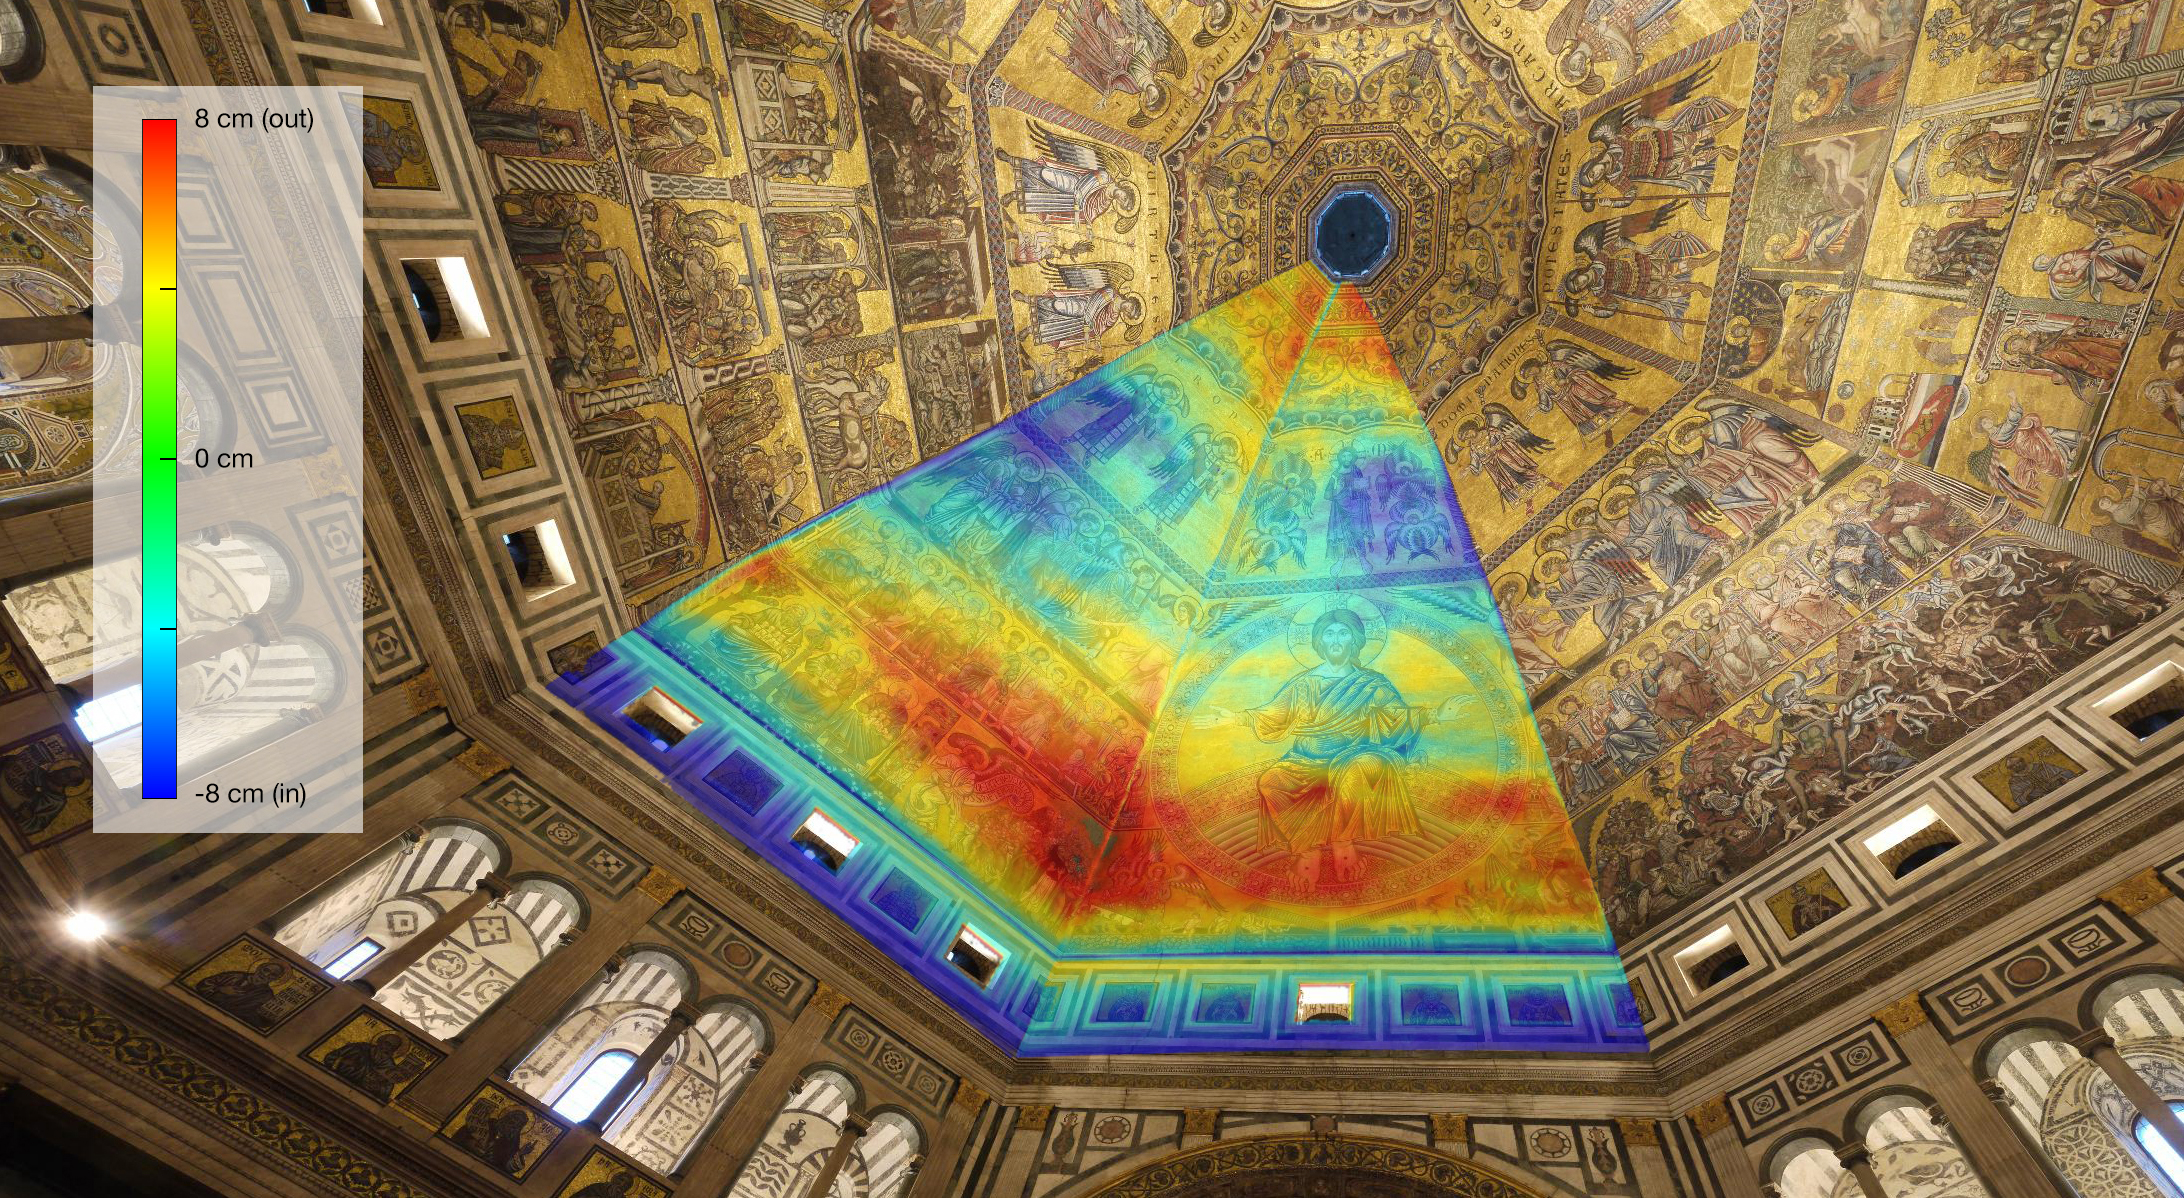 Mosaic Panorama of Baptistery ceiling